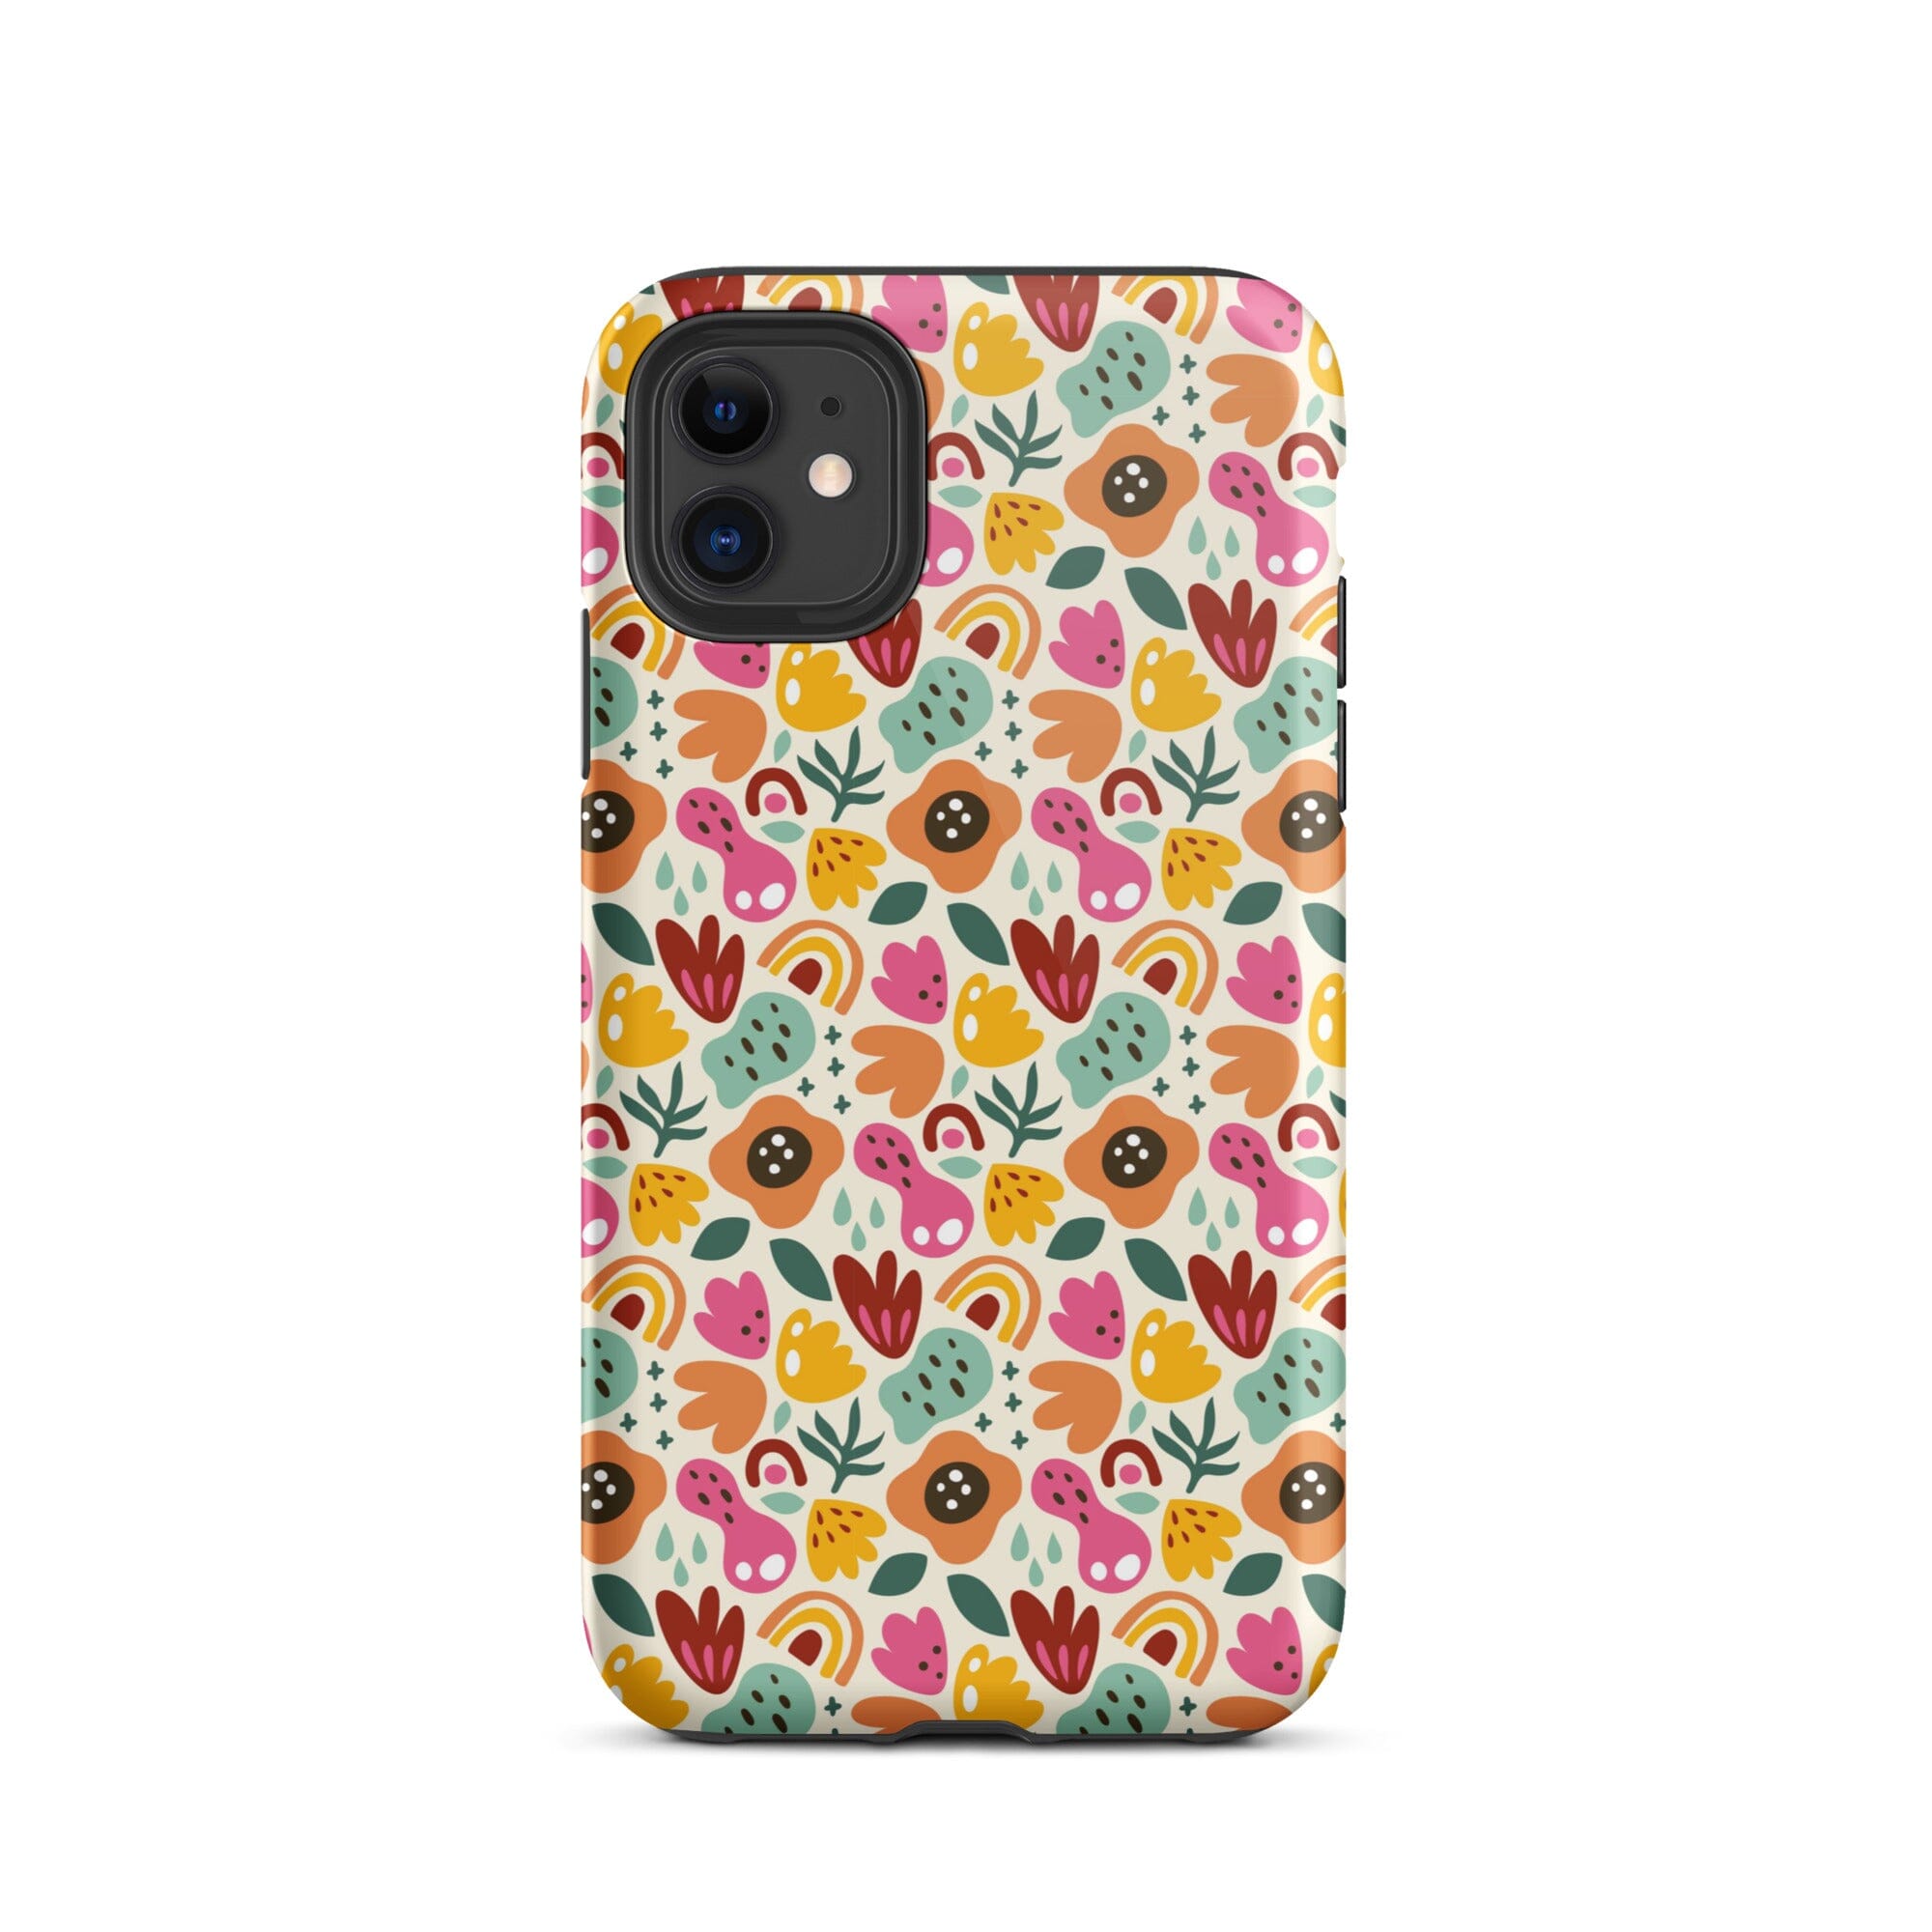 Doodles iPhone Case - KBB Exclusive Knitted Belle Boutique iPhone 11 